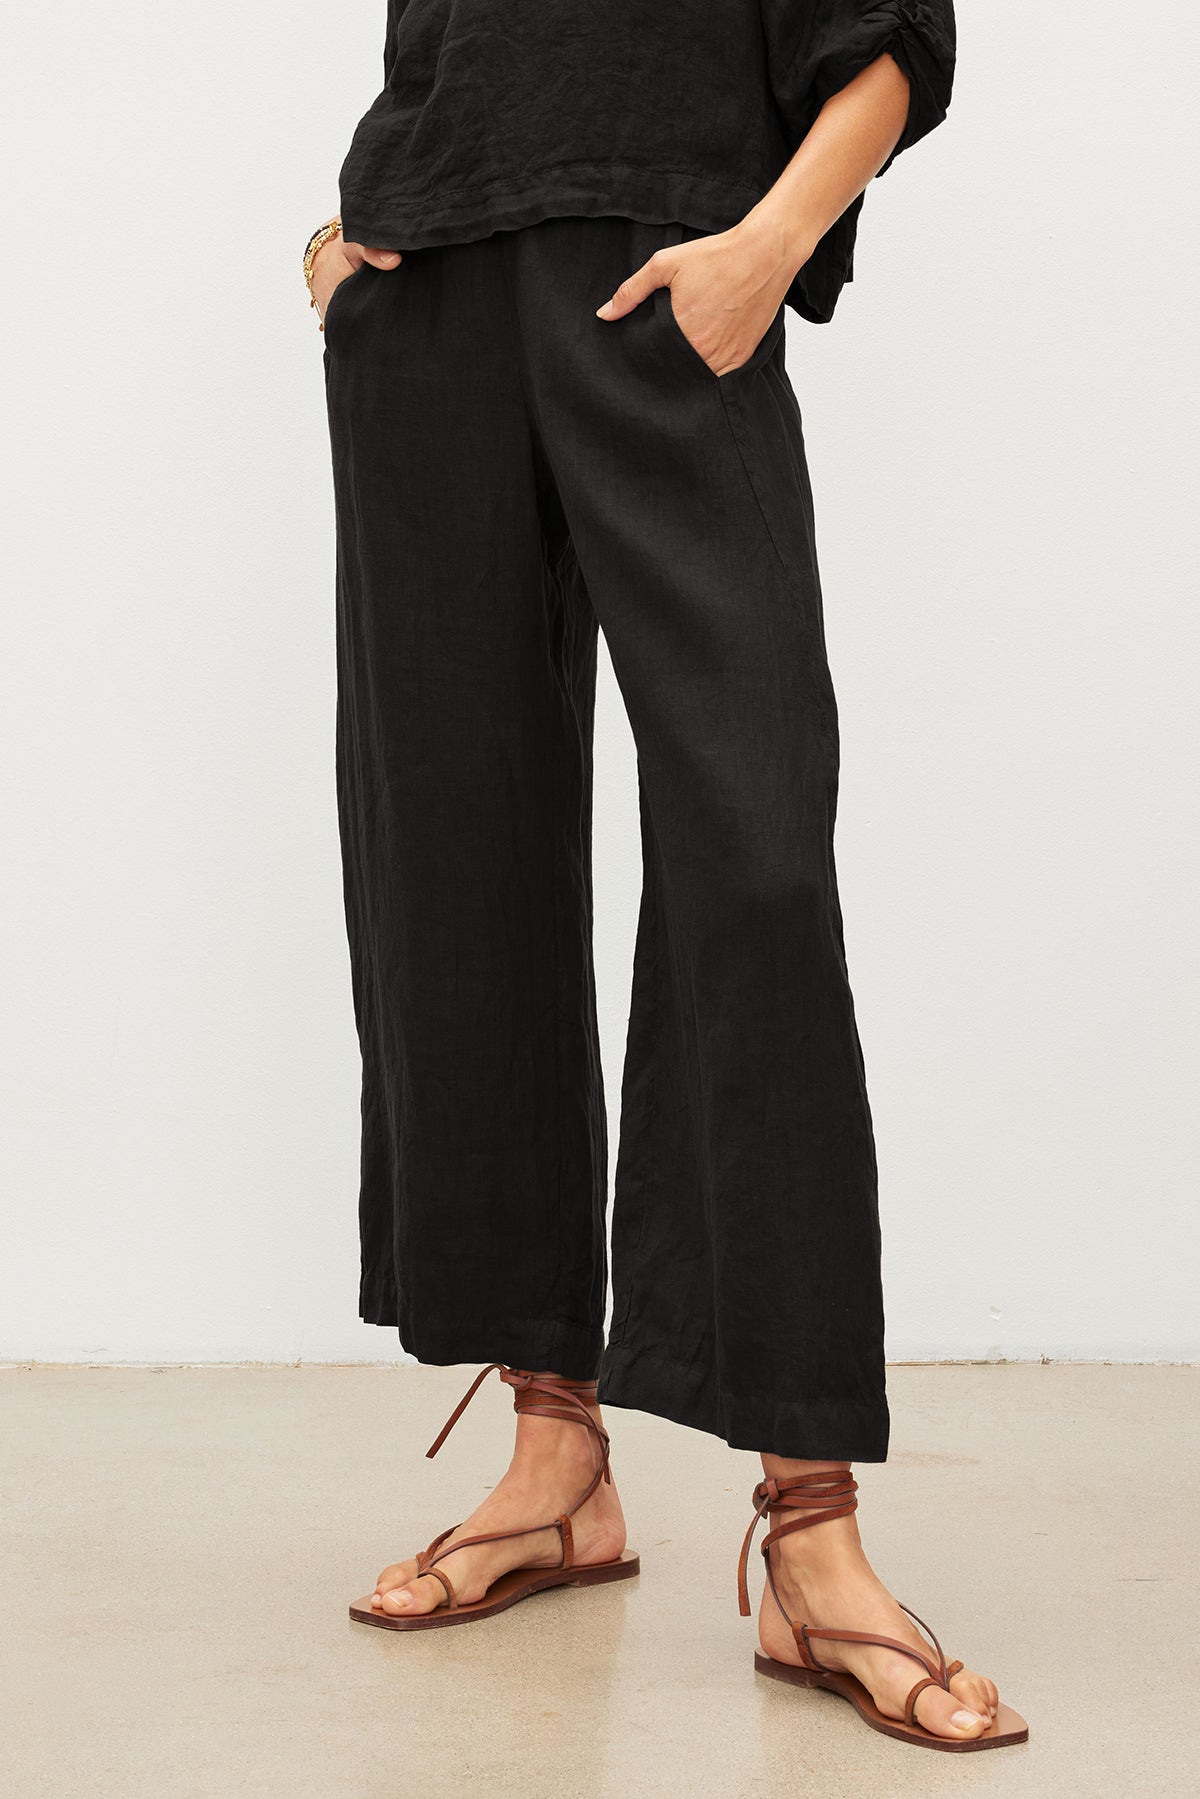 A woman wearing Velvet by Graham & Spencer's LOLA LINEN PANT with an elastic waist.-36002668216513